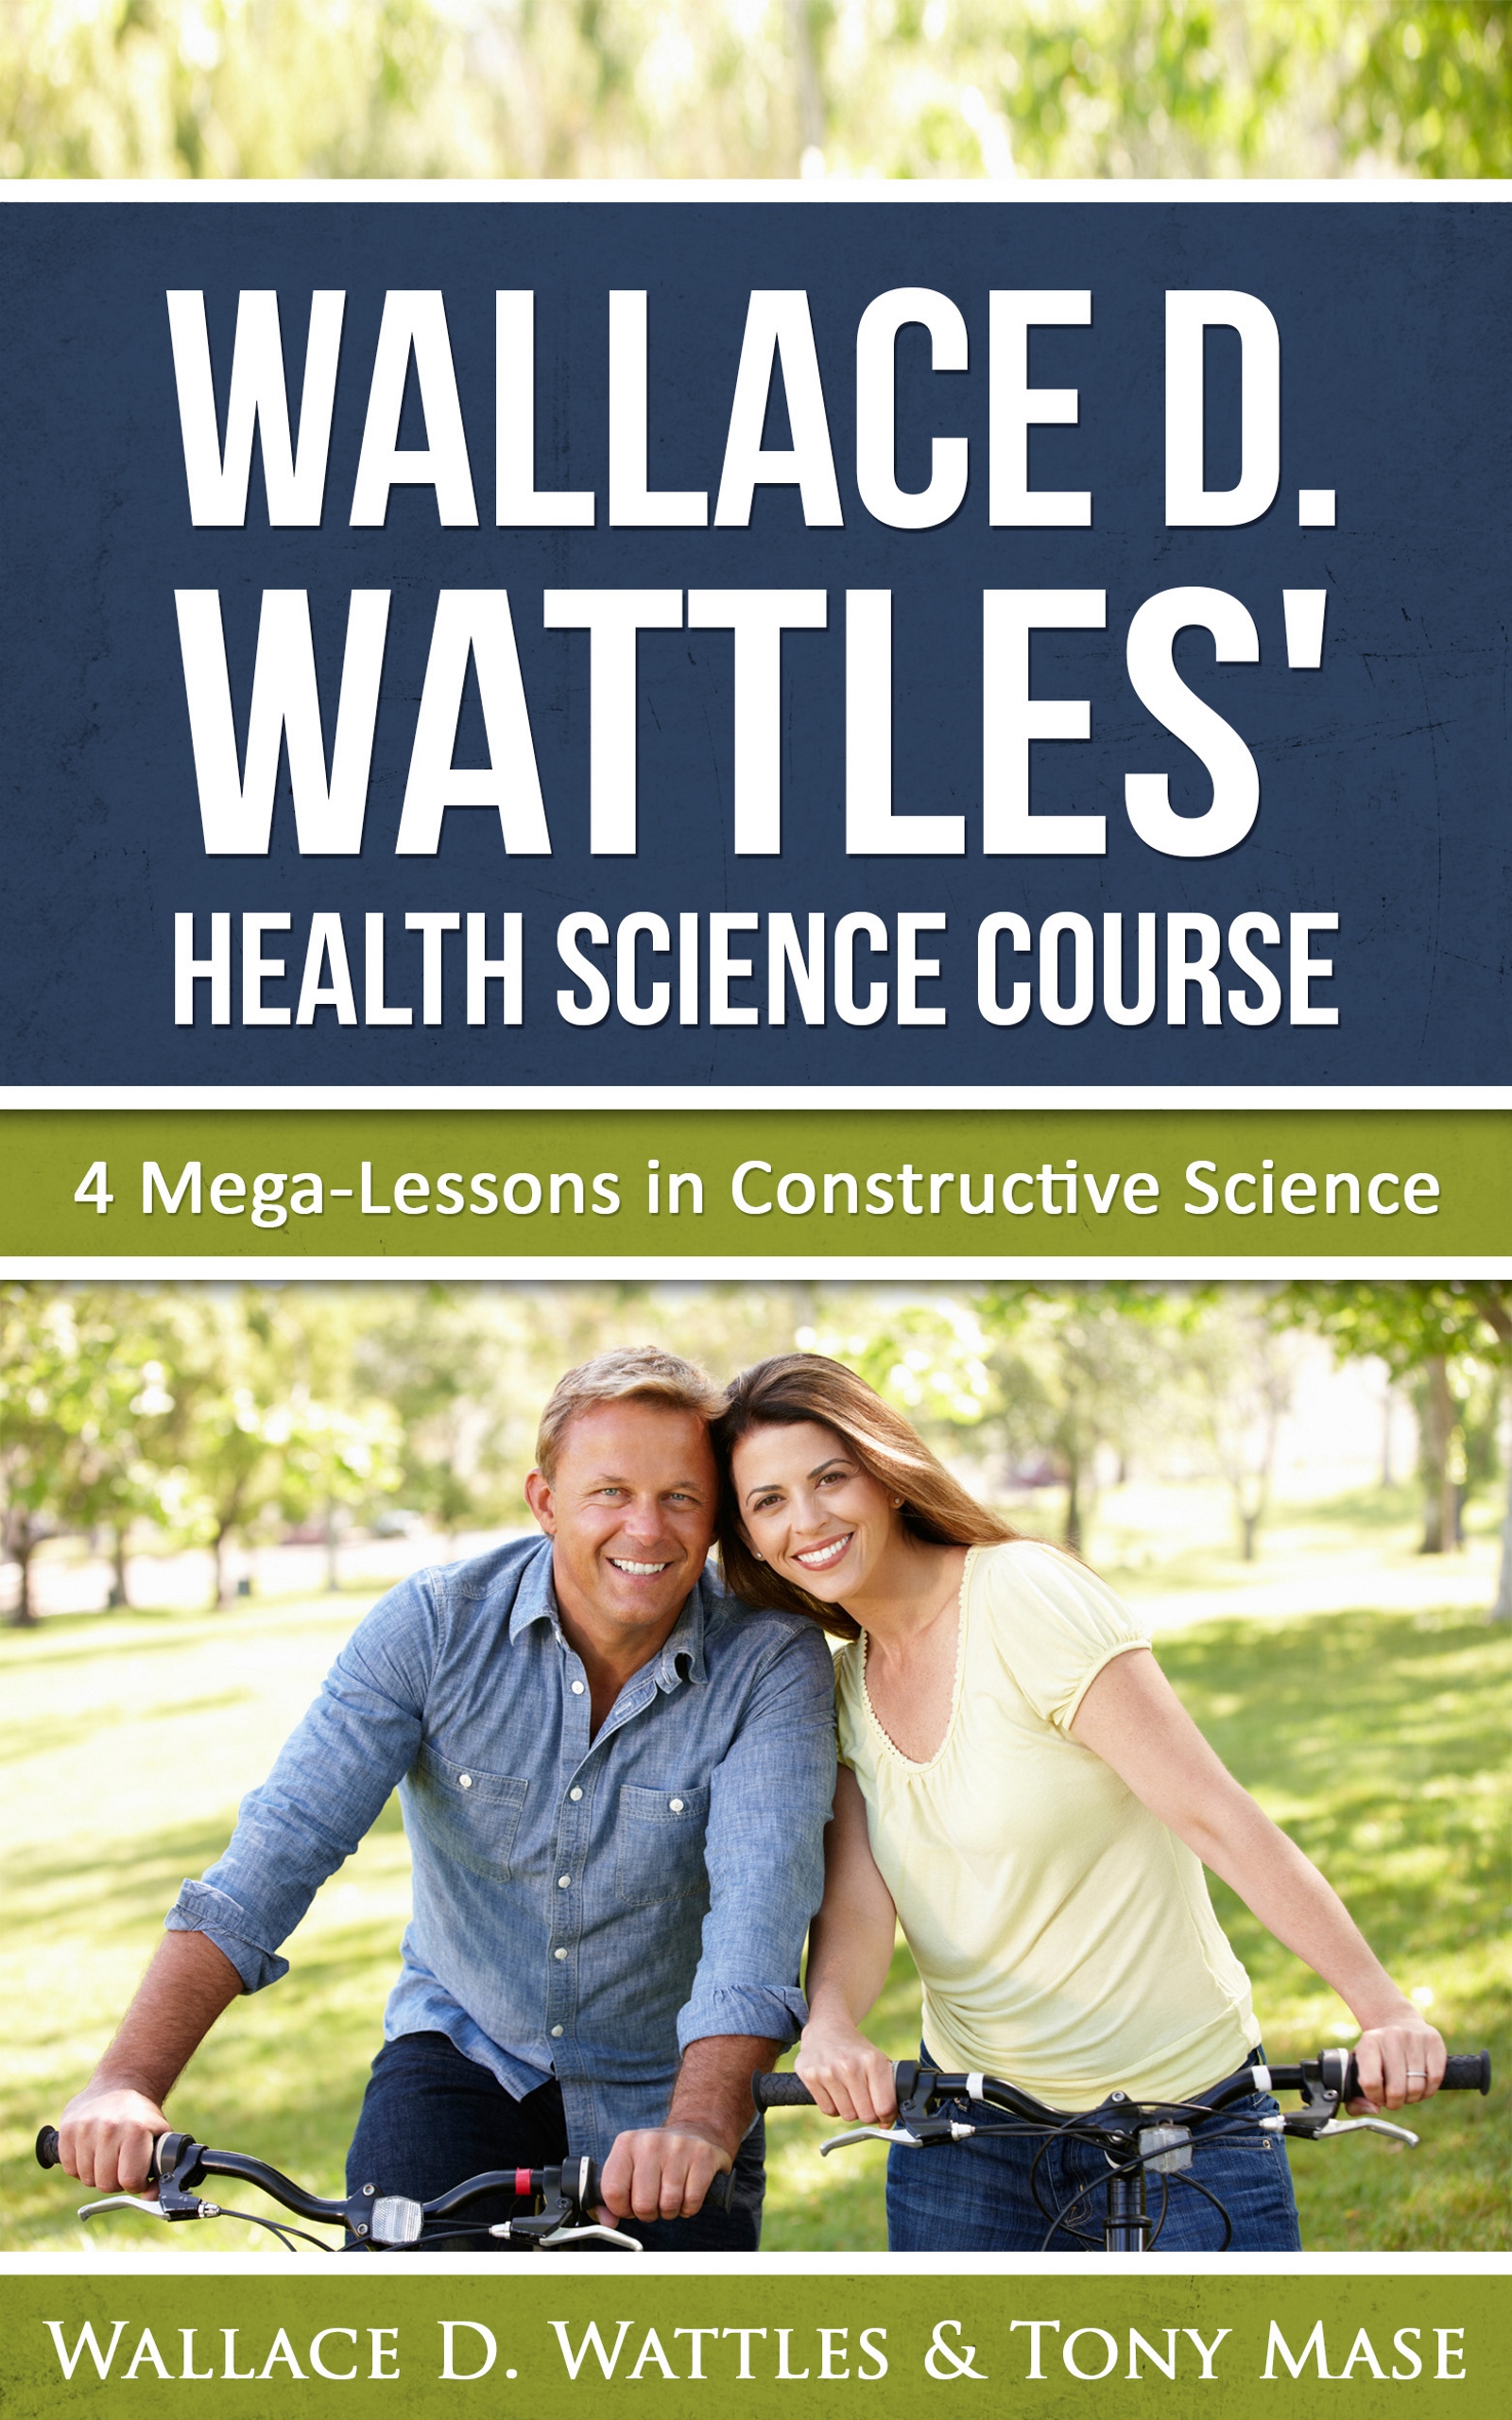 FREE: Wallace D. Wattles’ Health Science Course by Wallace D. Wattles